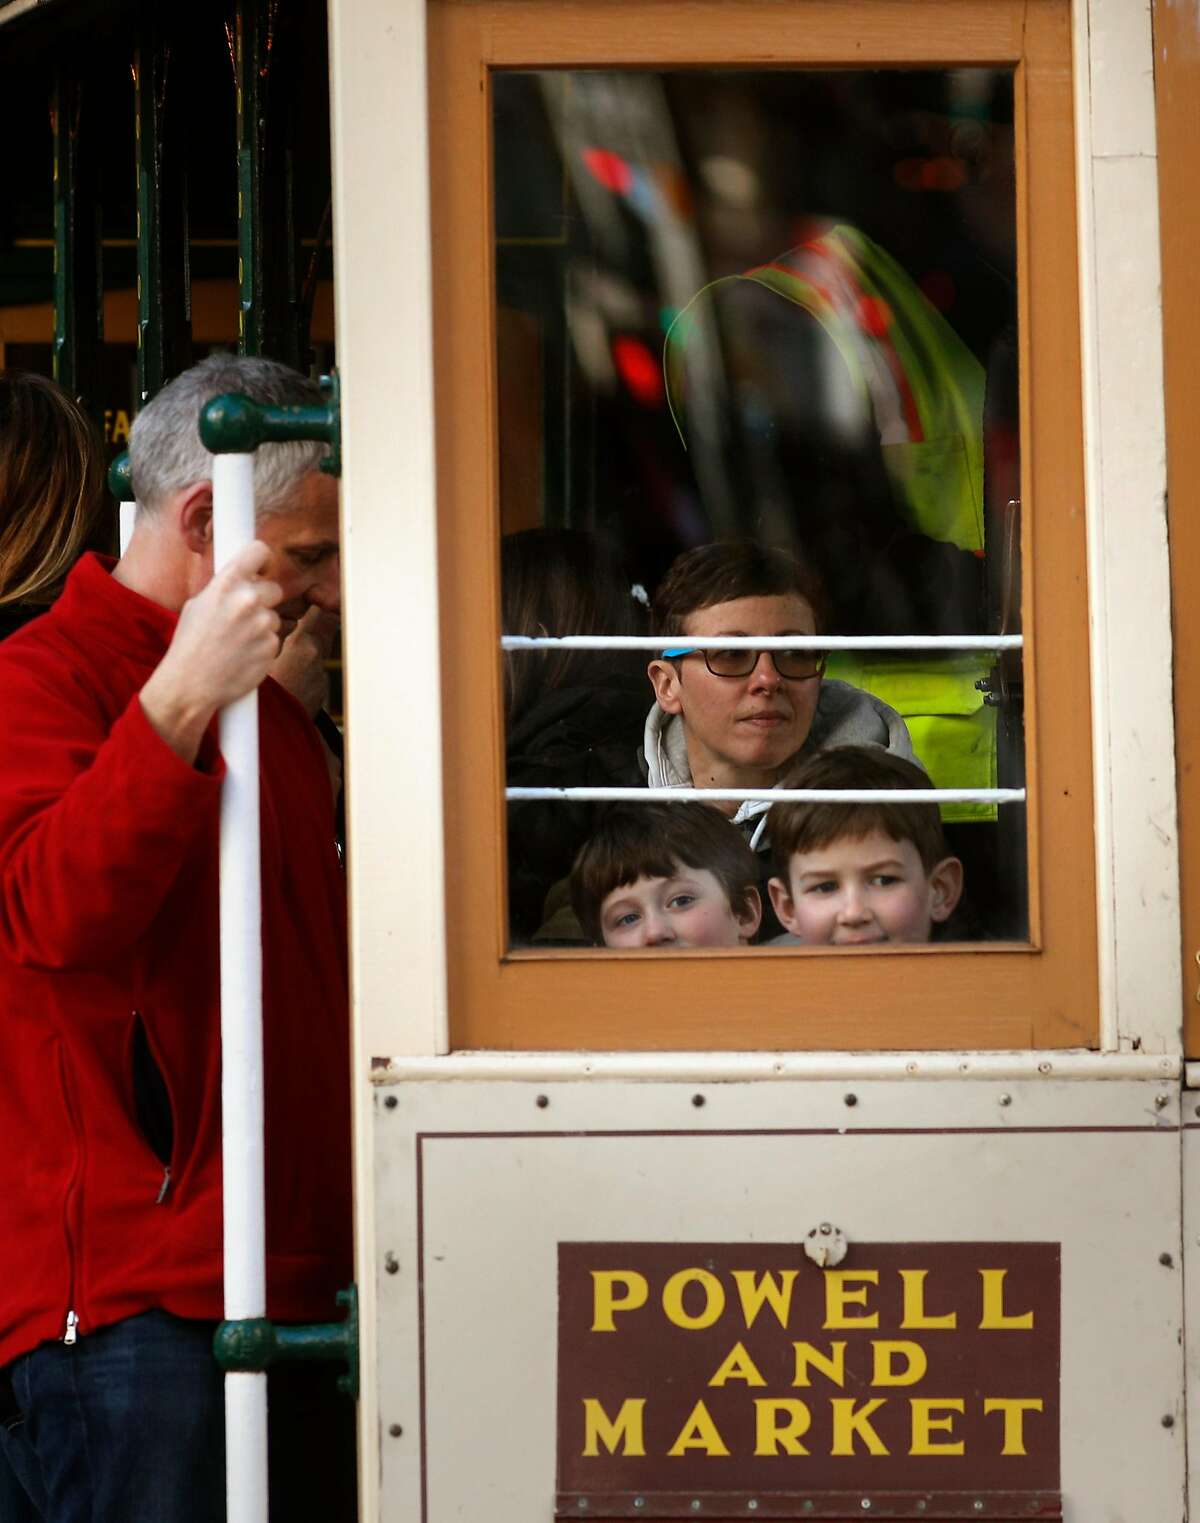 Families ride the world famous cable cars along the Powell st. line in San Francisco, Calif. on Mon. Mar. 26, 2018.